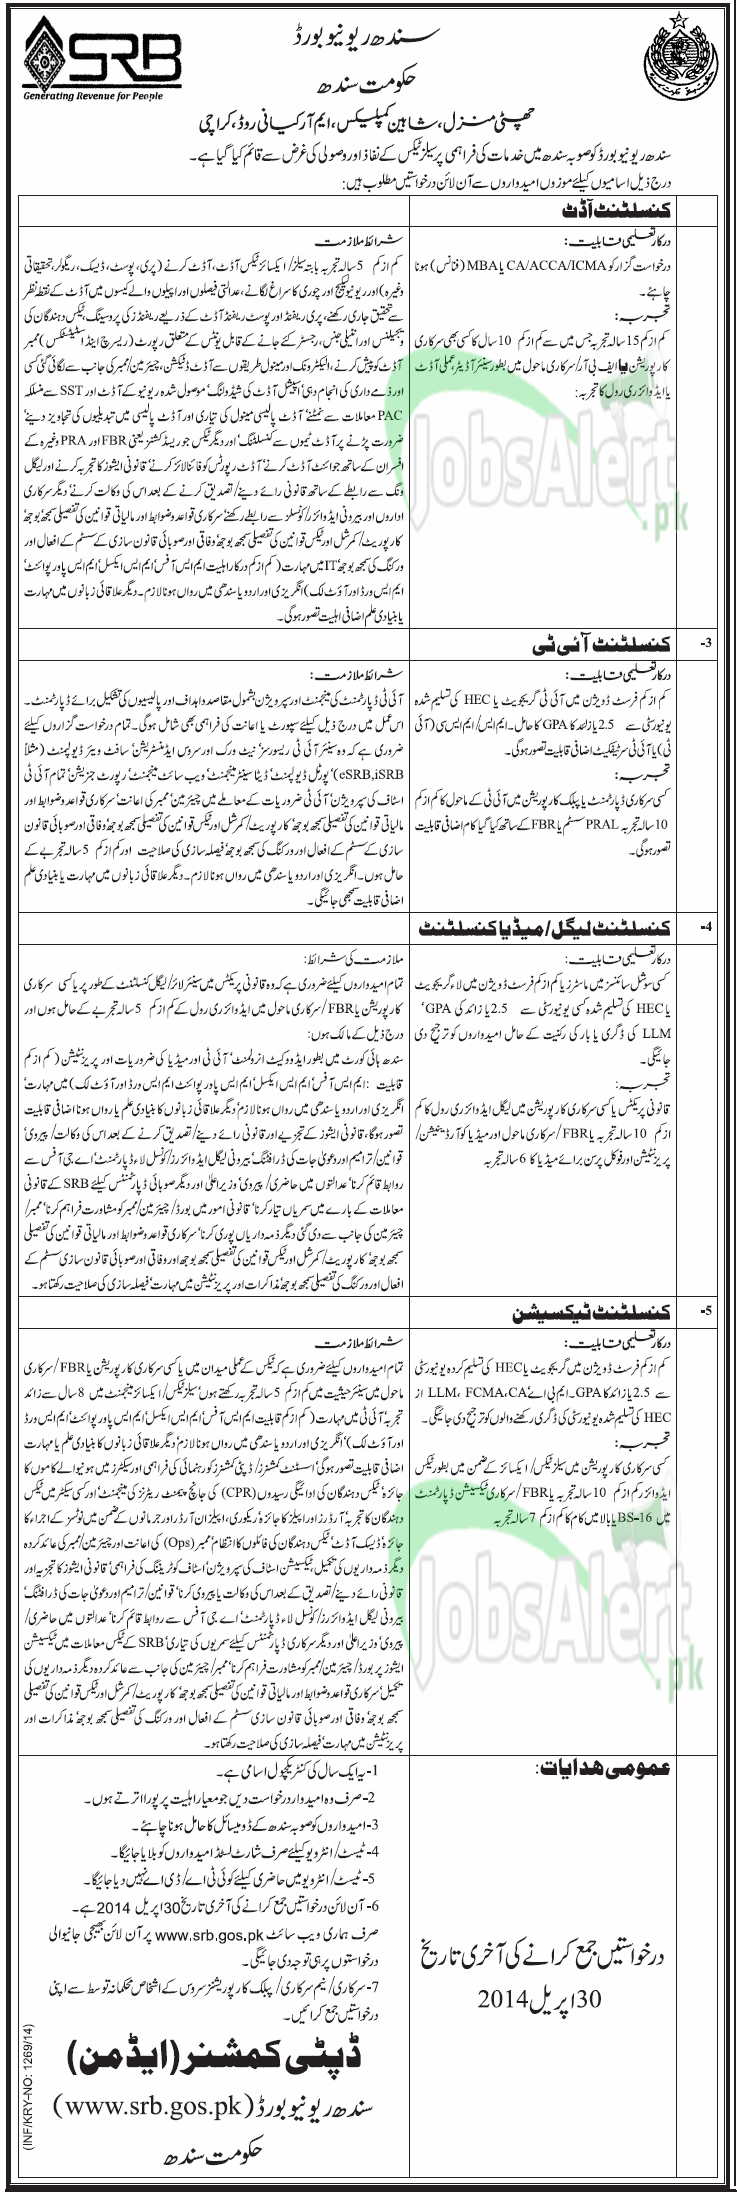 Consultant Jobs in Sindh Revenue Board 2014 Govt. of Sindh KHI